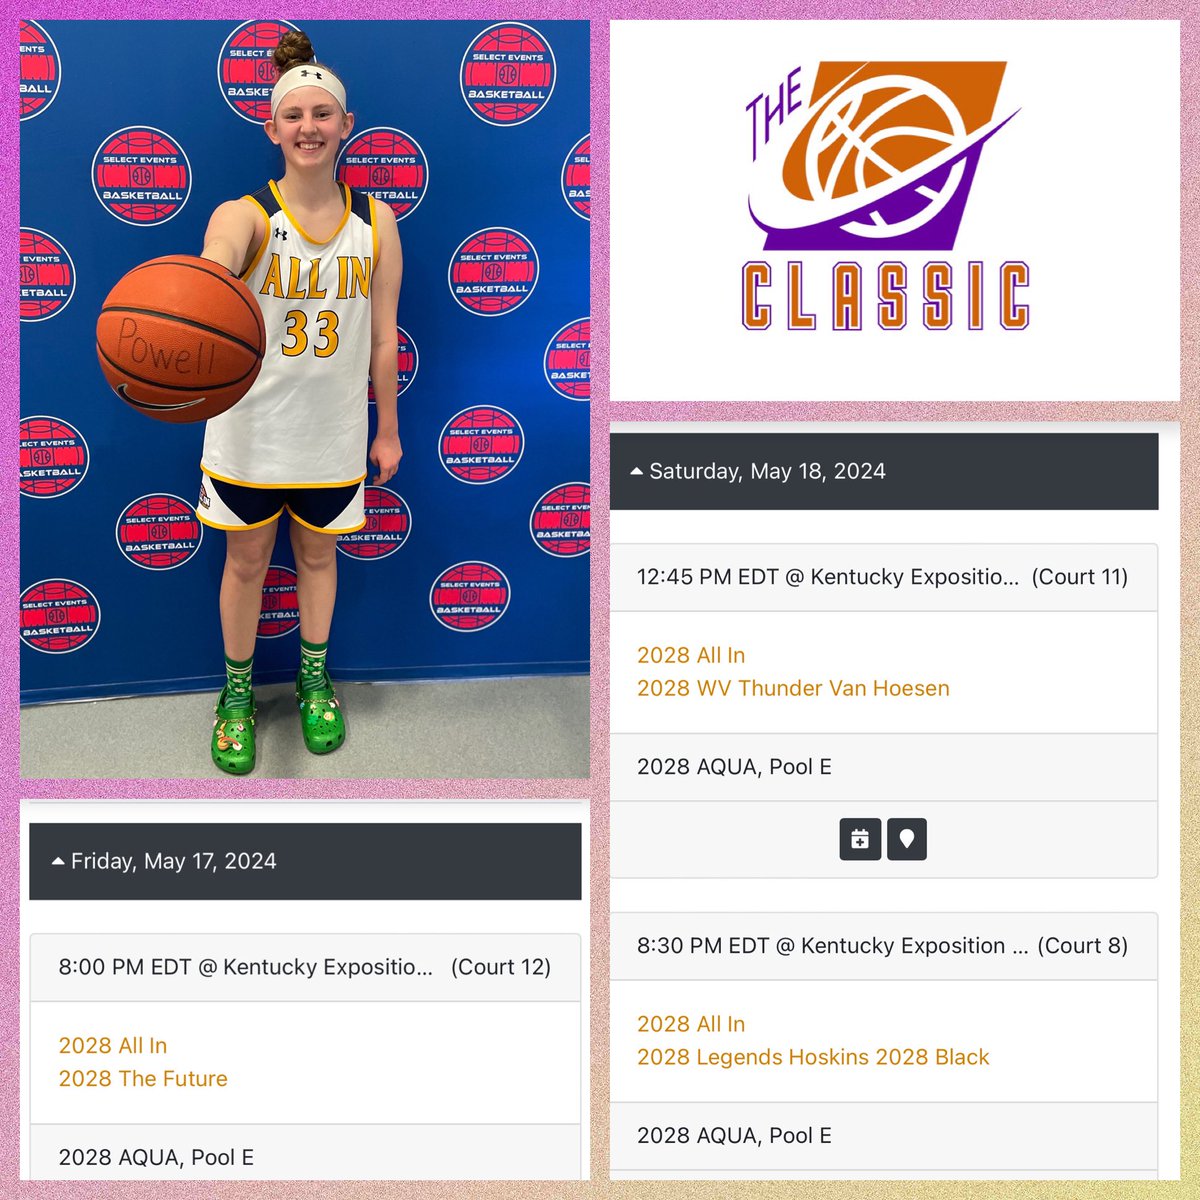 Ready to get to work with my team tomorrow in Louisville! Come check us out! 💪🏻🏀💪🏻@ALLNHOOPS